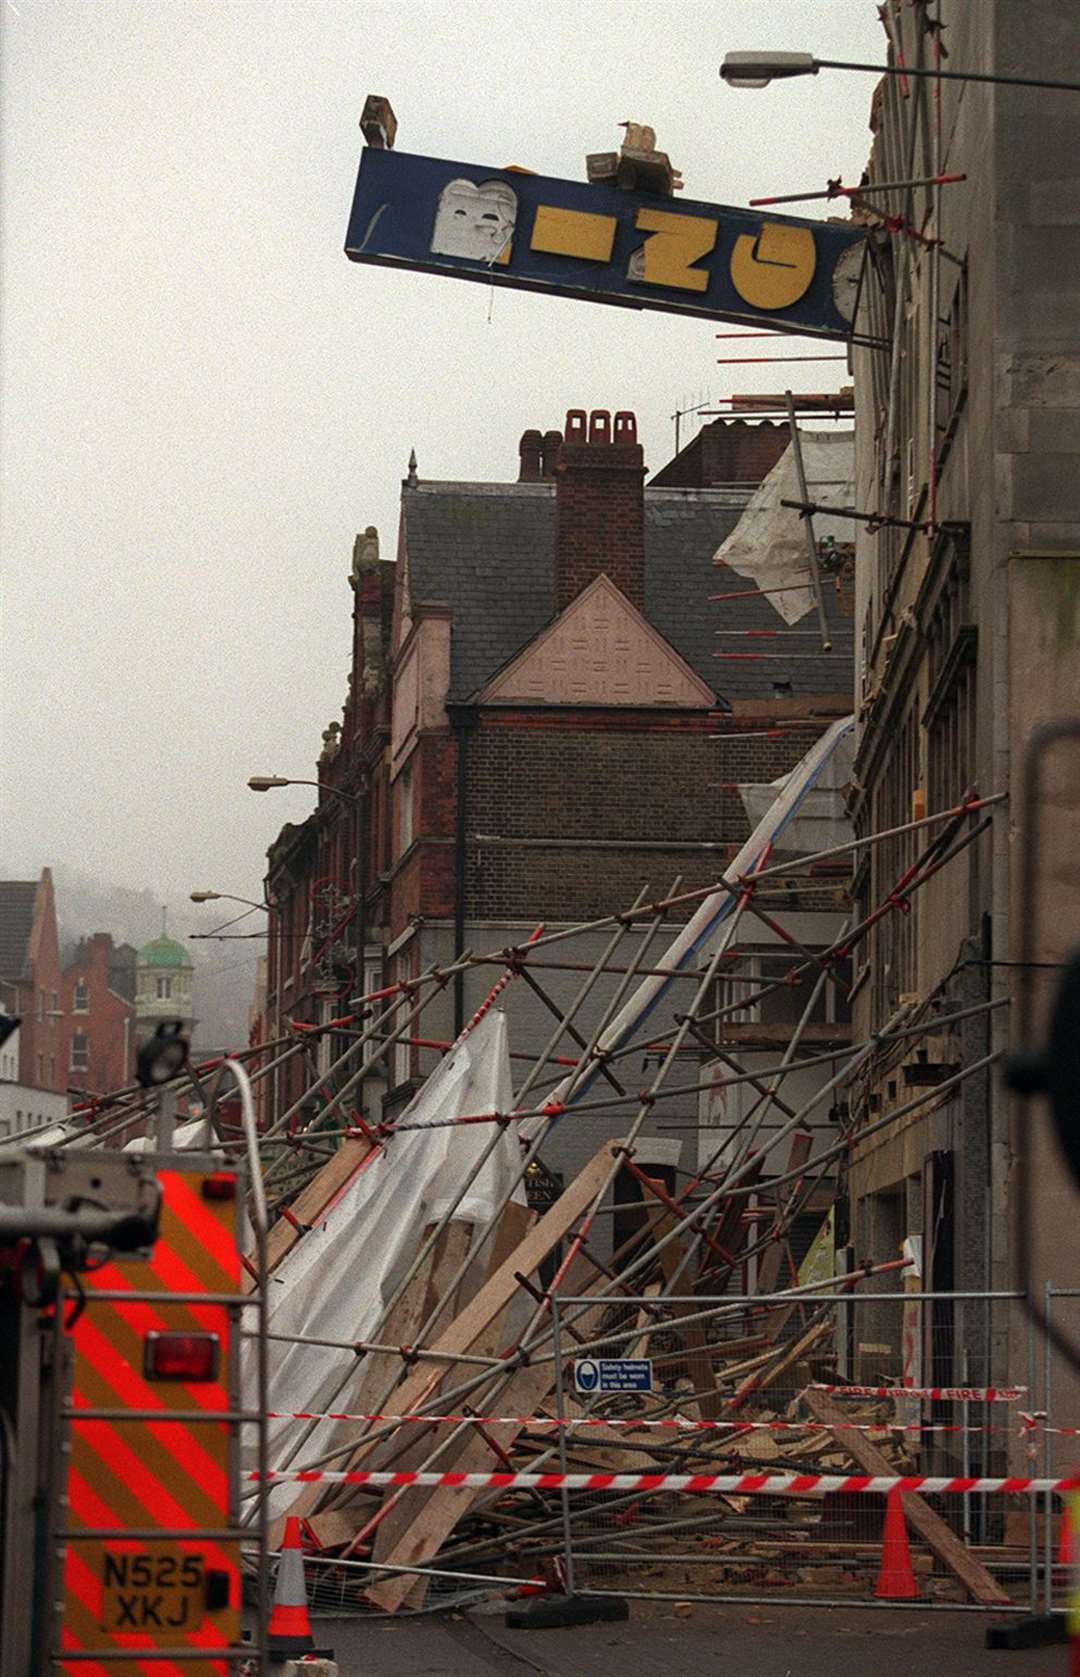 The bingo advertising sign hangs perilously after part of the building collapsed during demolition work on November 25, 1998